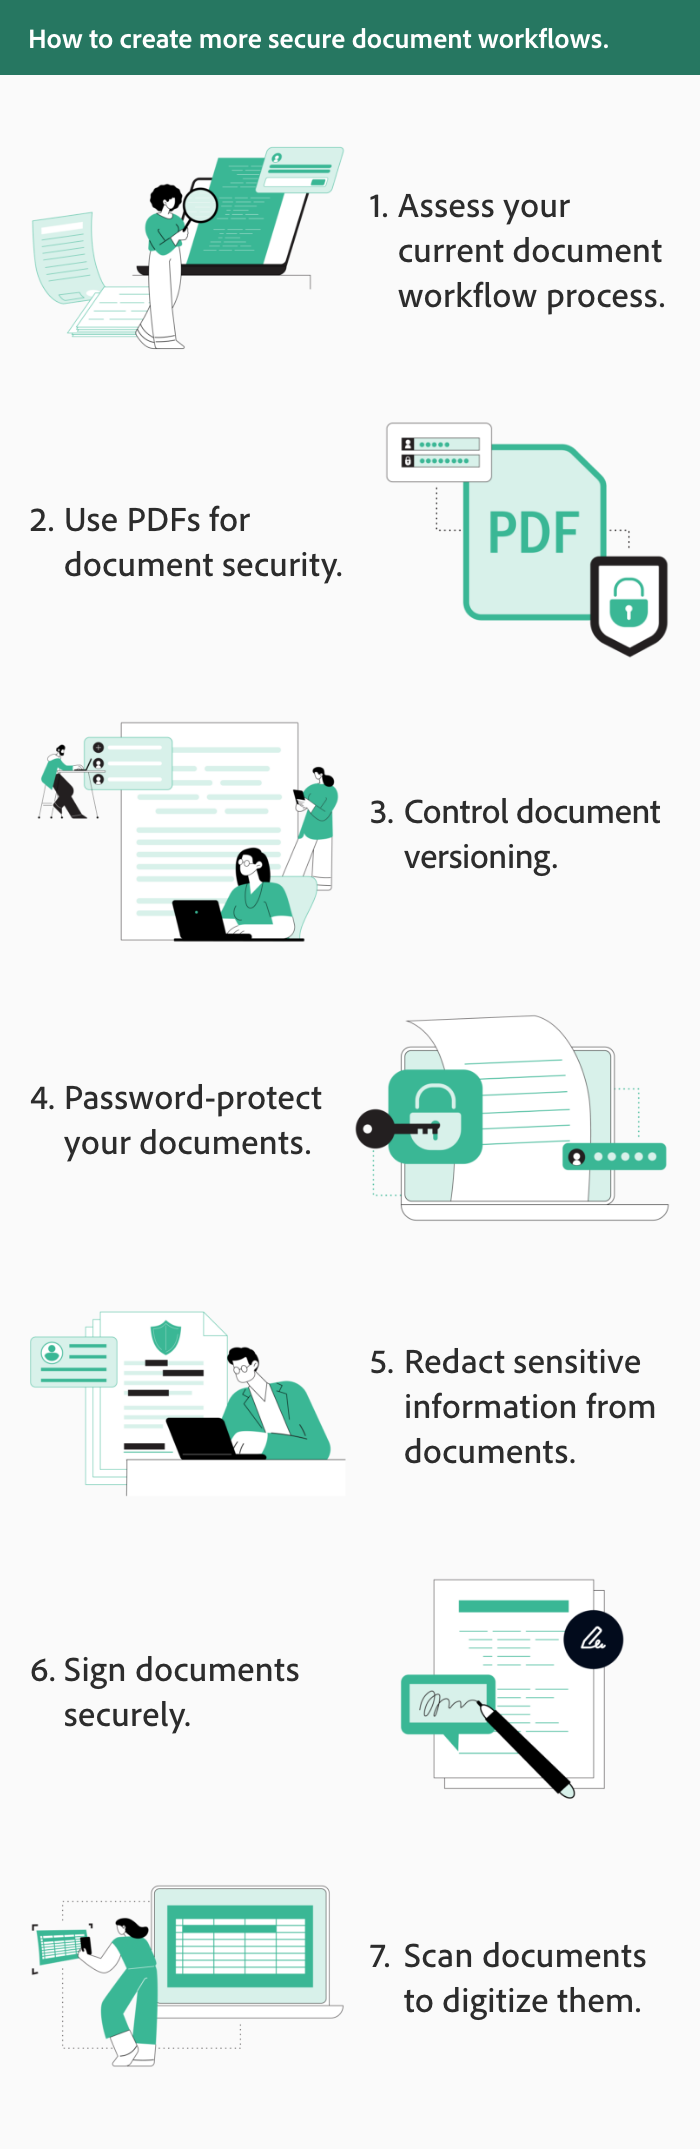 Create secure workflows — assess your process, use PDFs, control versioning, use passwords, redact sensitive info, sign docs, and scan them.